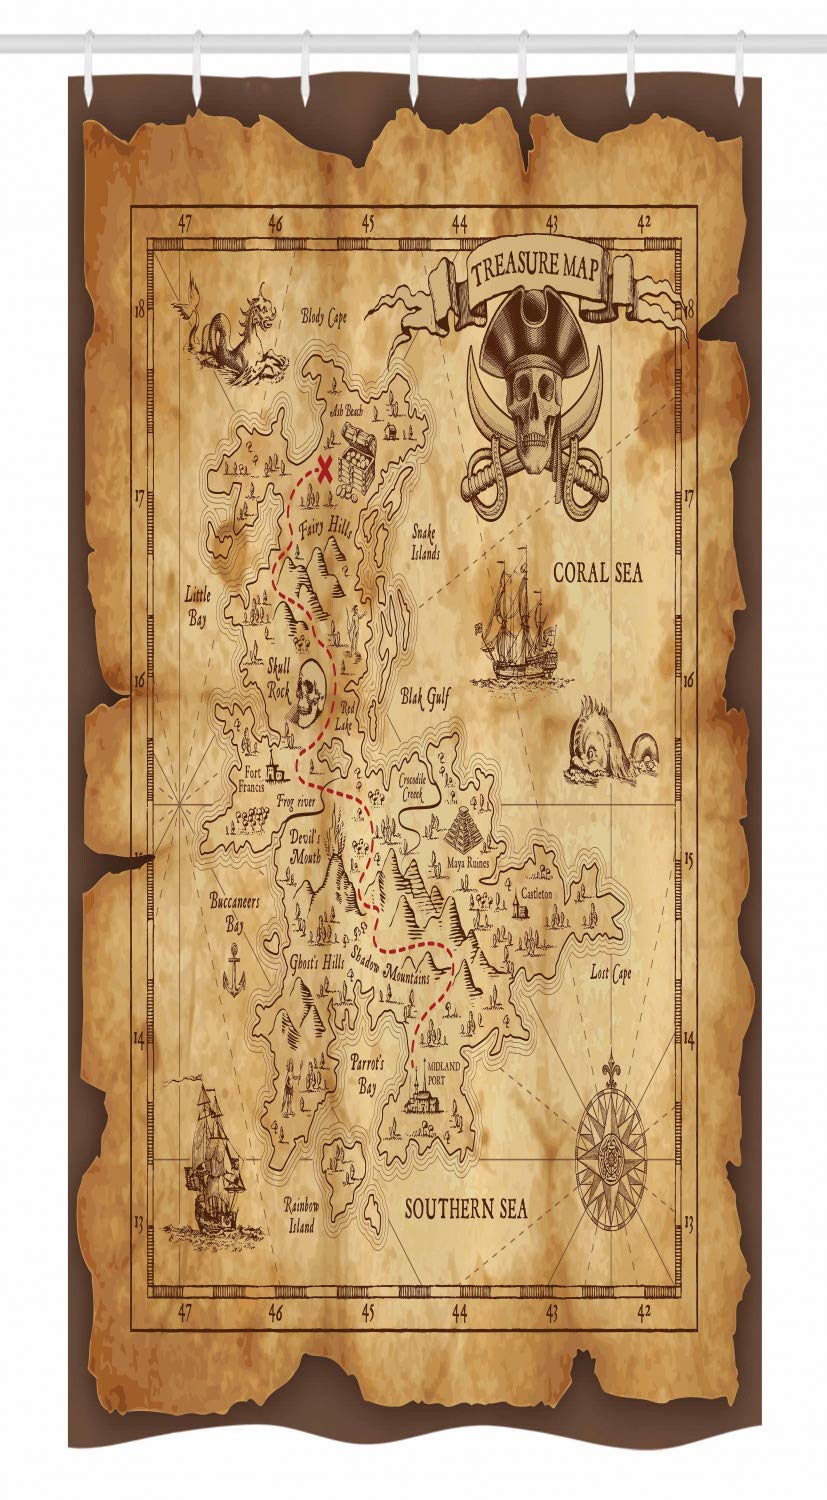 Ambesonne Island Map Stall Shower Curtain, Super Detailed Treasure Map Grungy Rustic Pirates Gold Secret Sea History Theme, Fabric Bathroom Decor Set with Hooks, 36